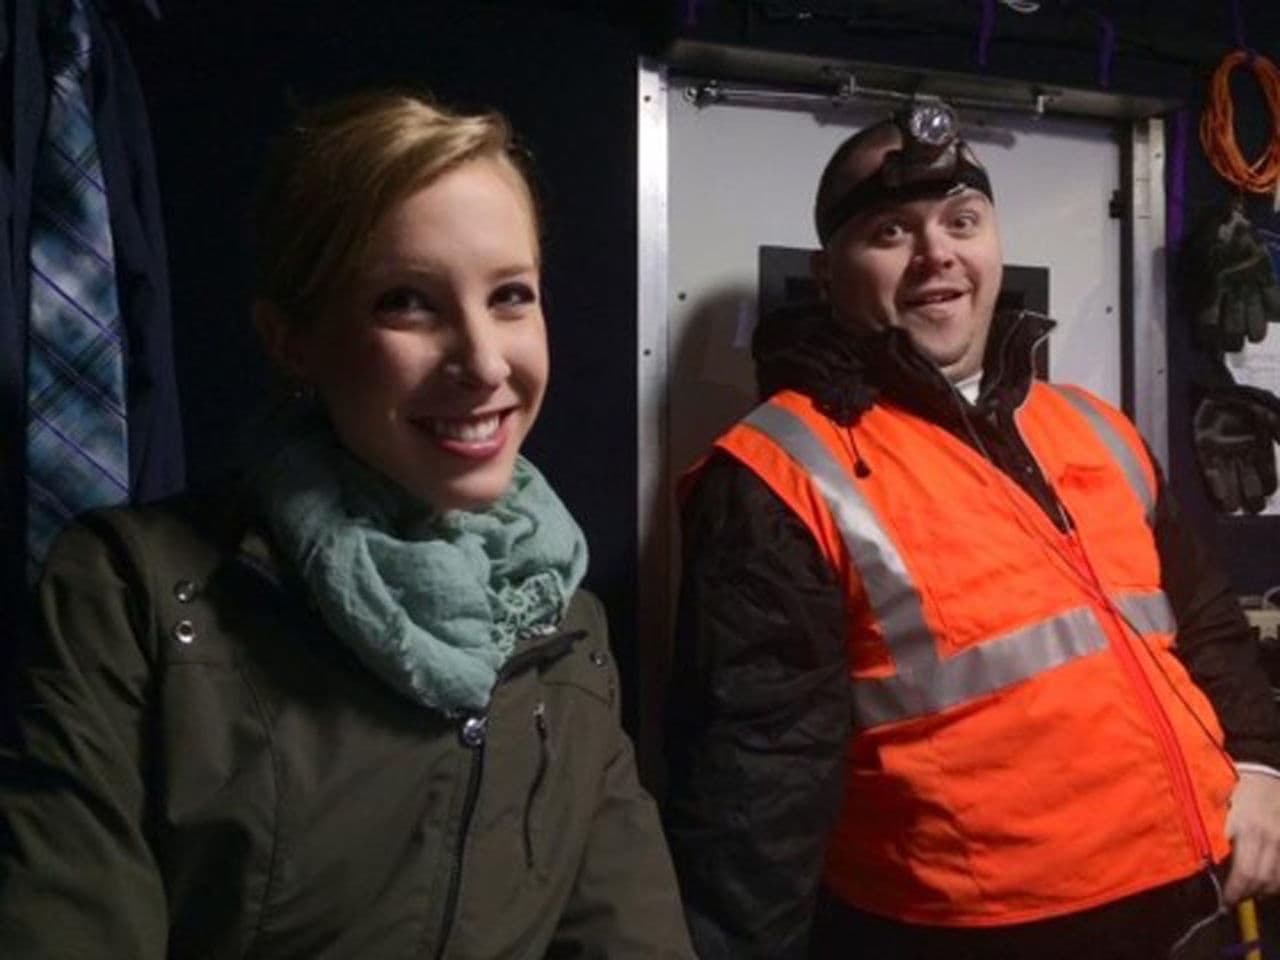 Alison Parker, left, and Adam Ward pictured in an undated photo. (WDBJ-TV/AP)